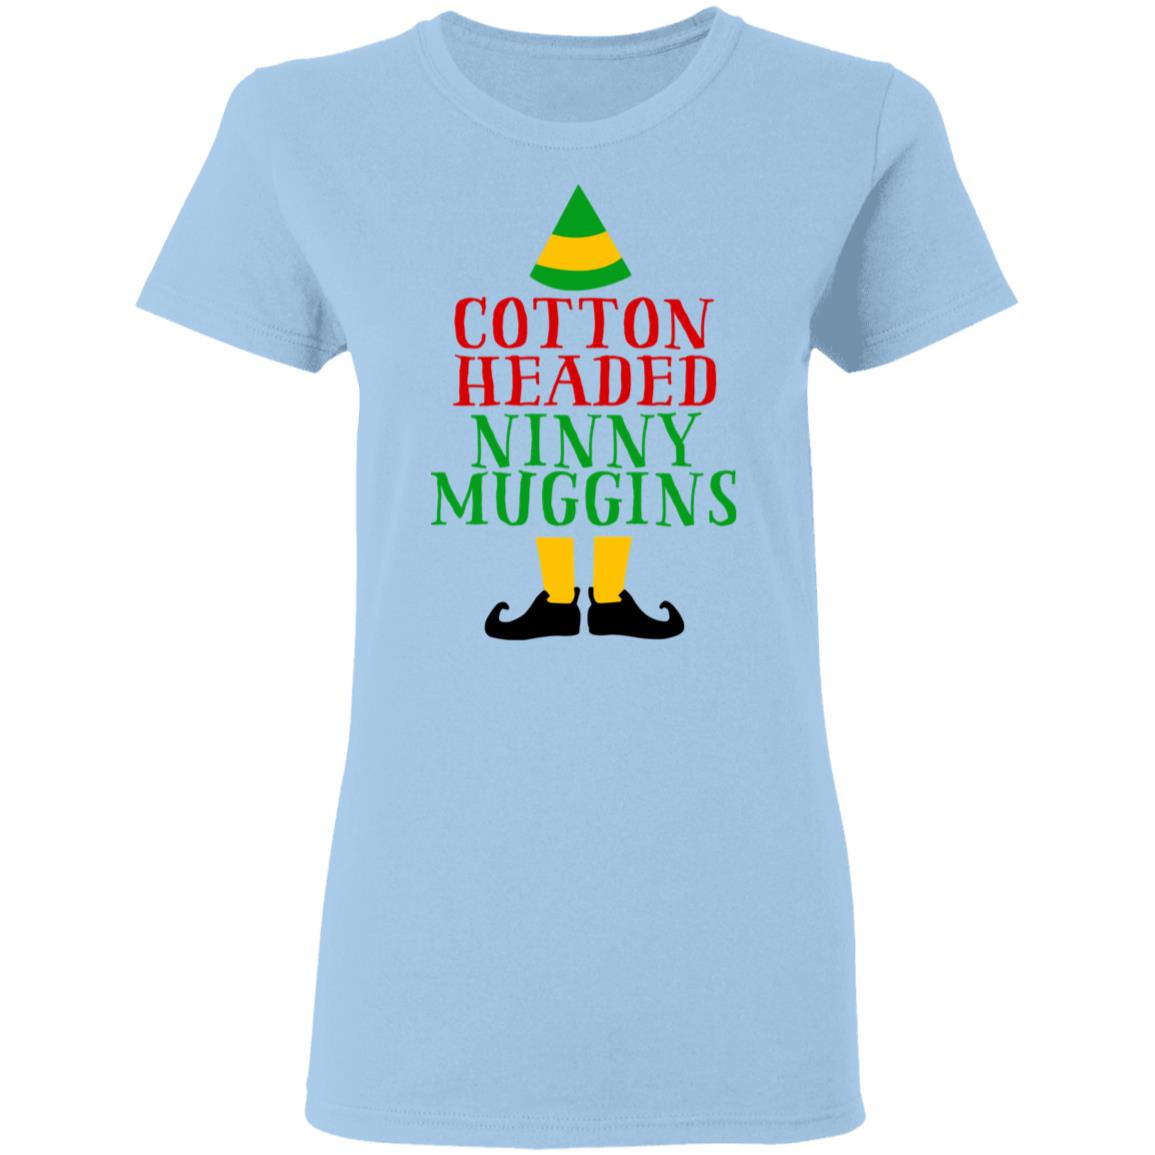 Buddy The Elf - World's Greatest Cup of Coffee Christmas Shirt - DTG  Printing